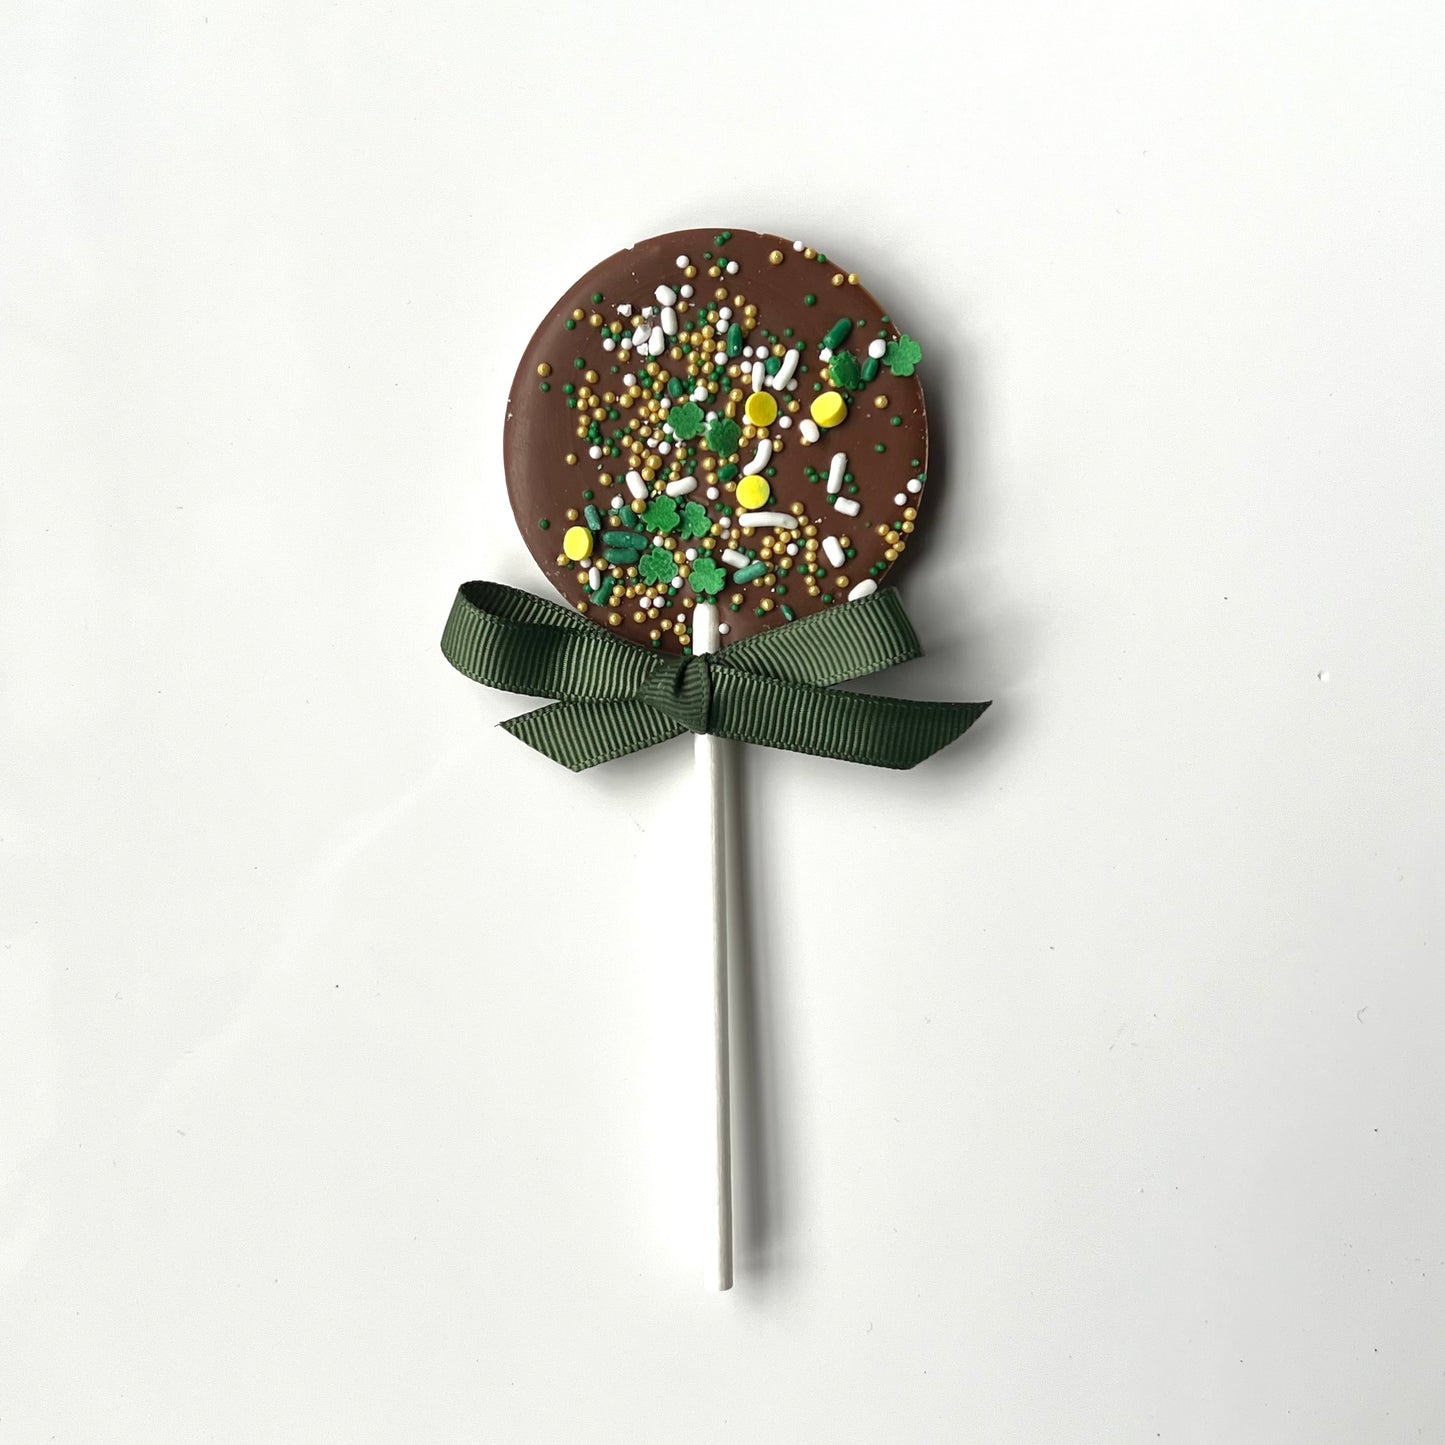 Lollipop circle with colorful sprinkles